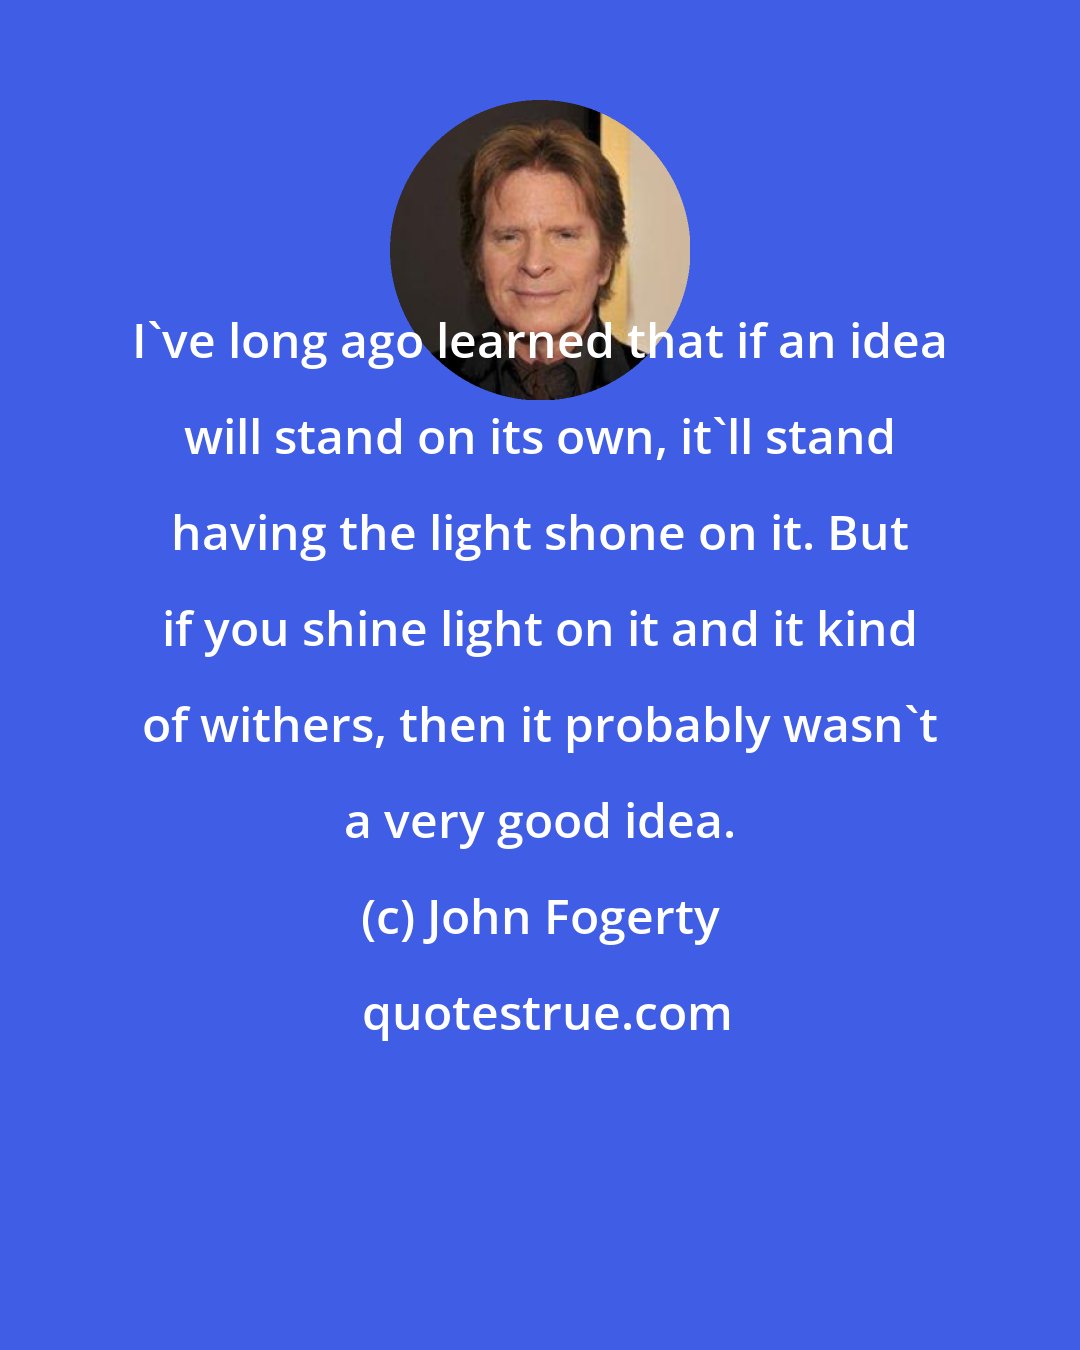 John Fogerty: I've long ago learned that if an idea will stand on its own, it'll stand having the light shone on it. But if you shine light on it and it kind of withers, then it probably wasn't a very good idea.